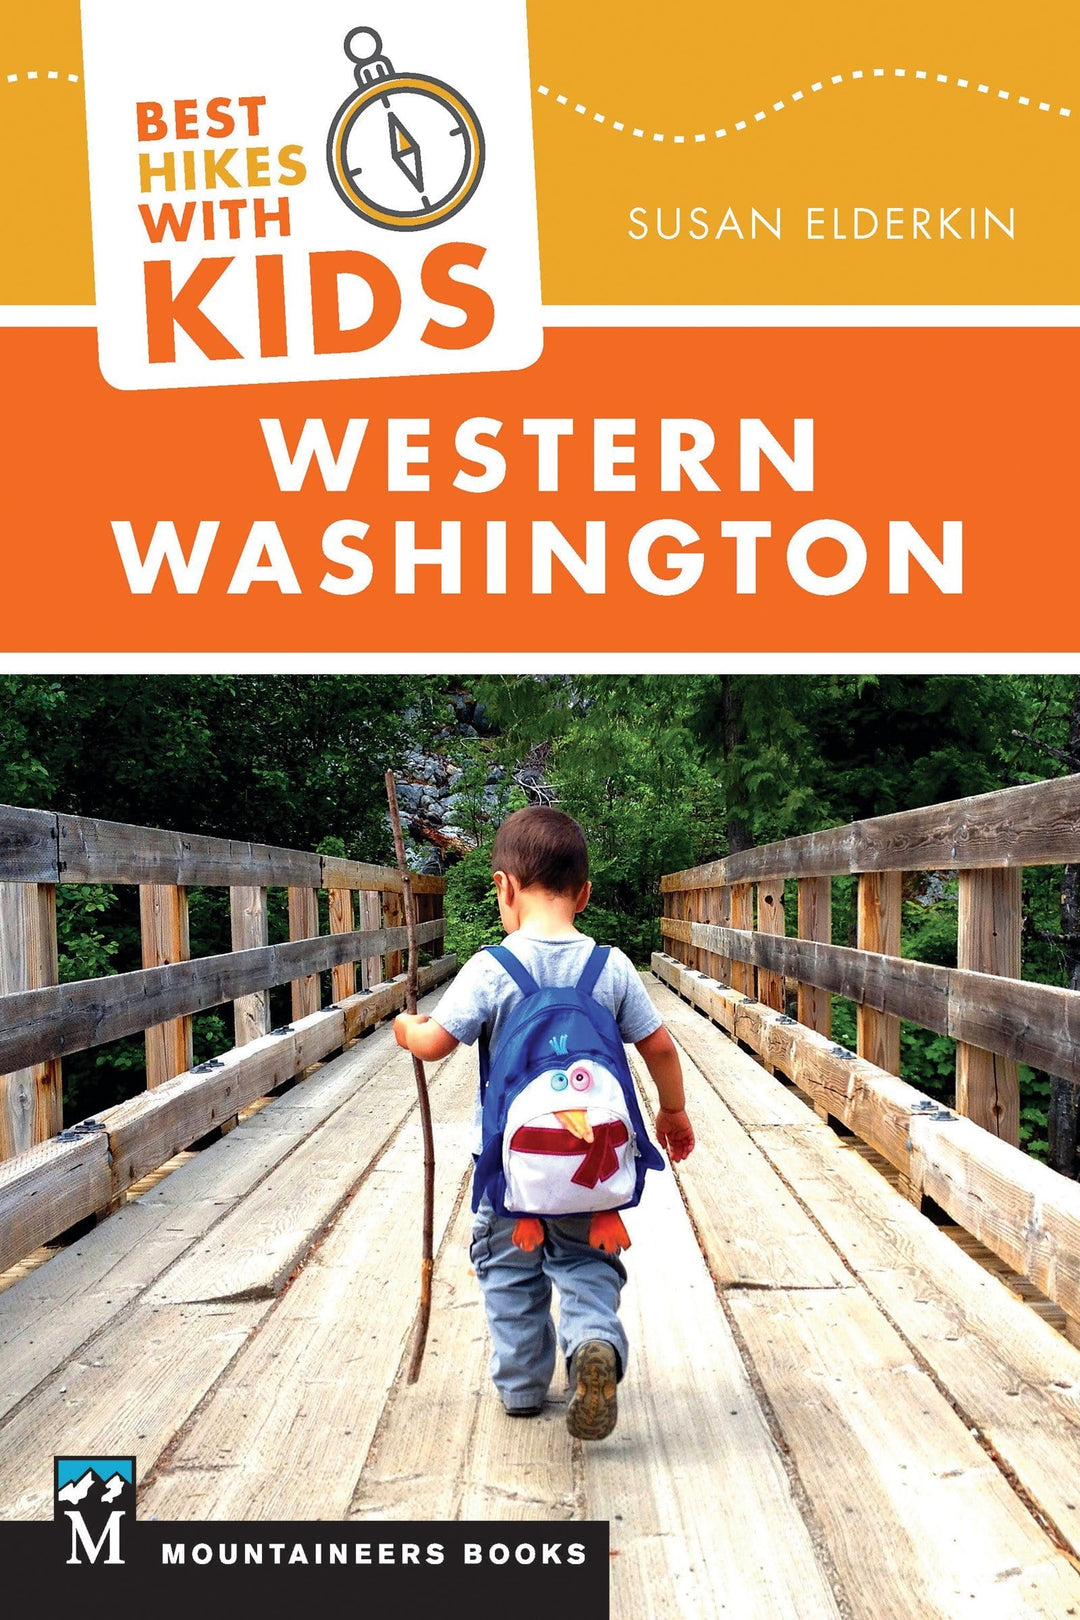 Mountaineers Books Book Best Hikes with Kids: Western Washington